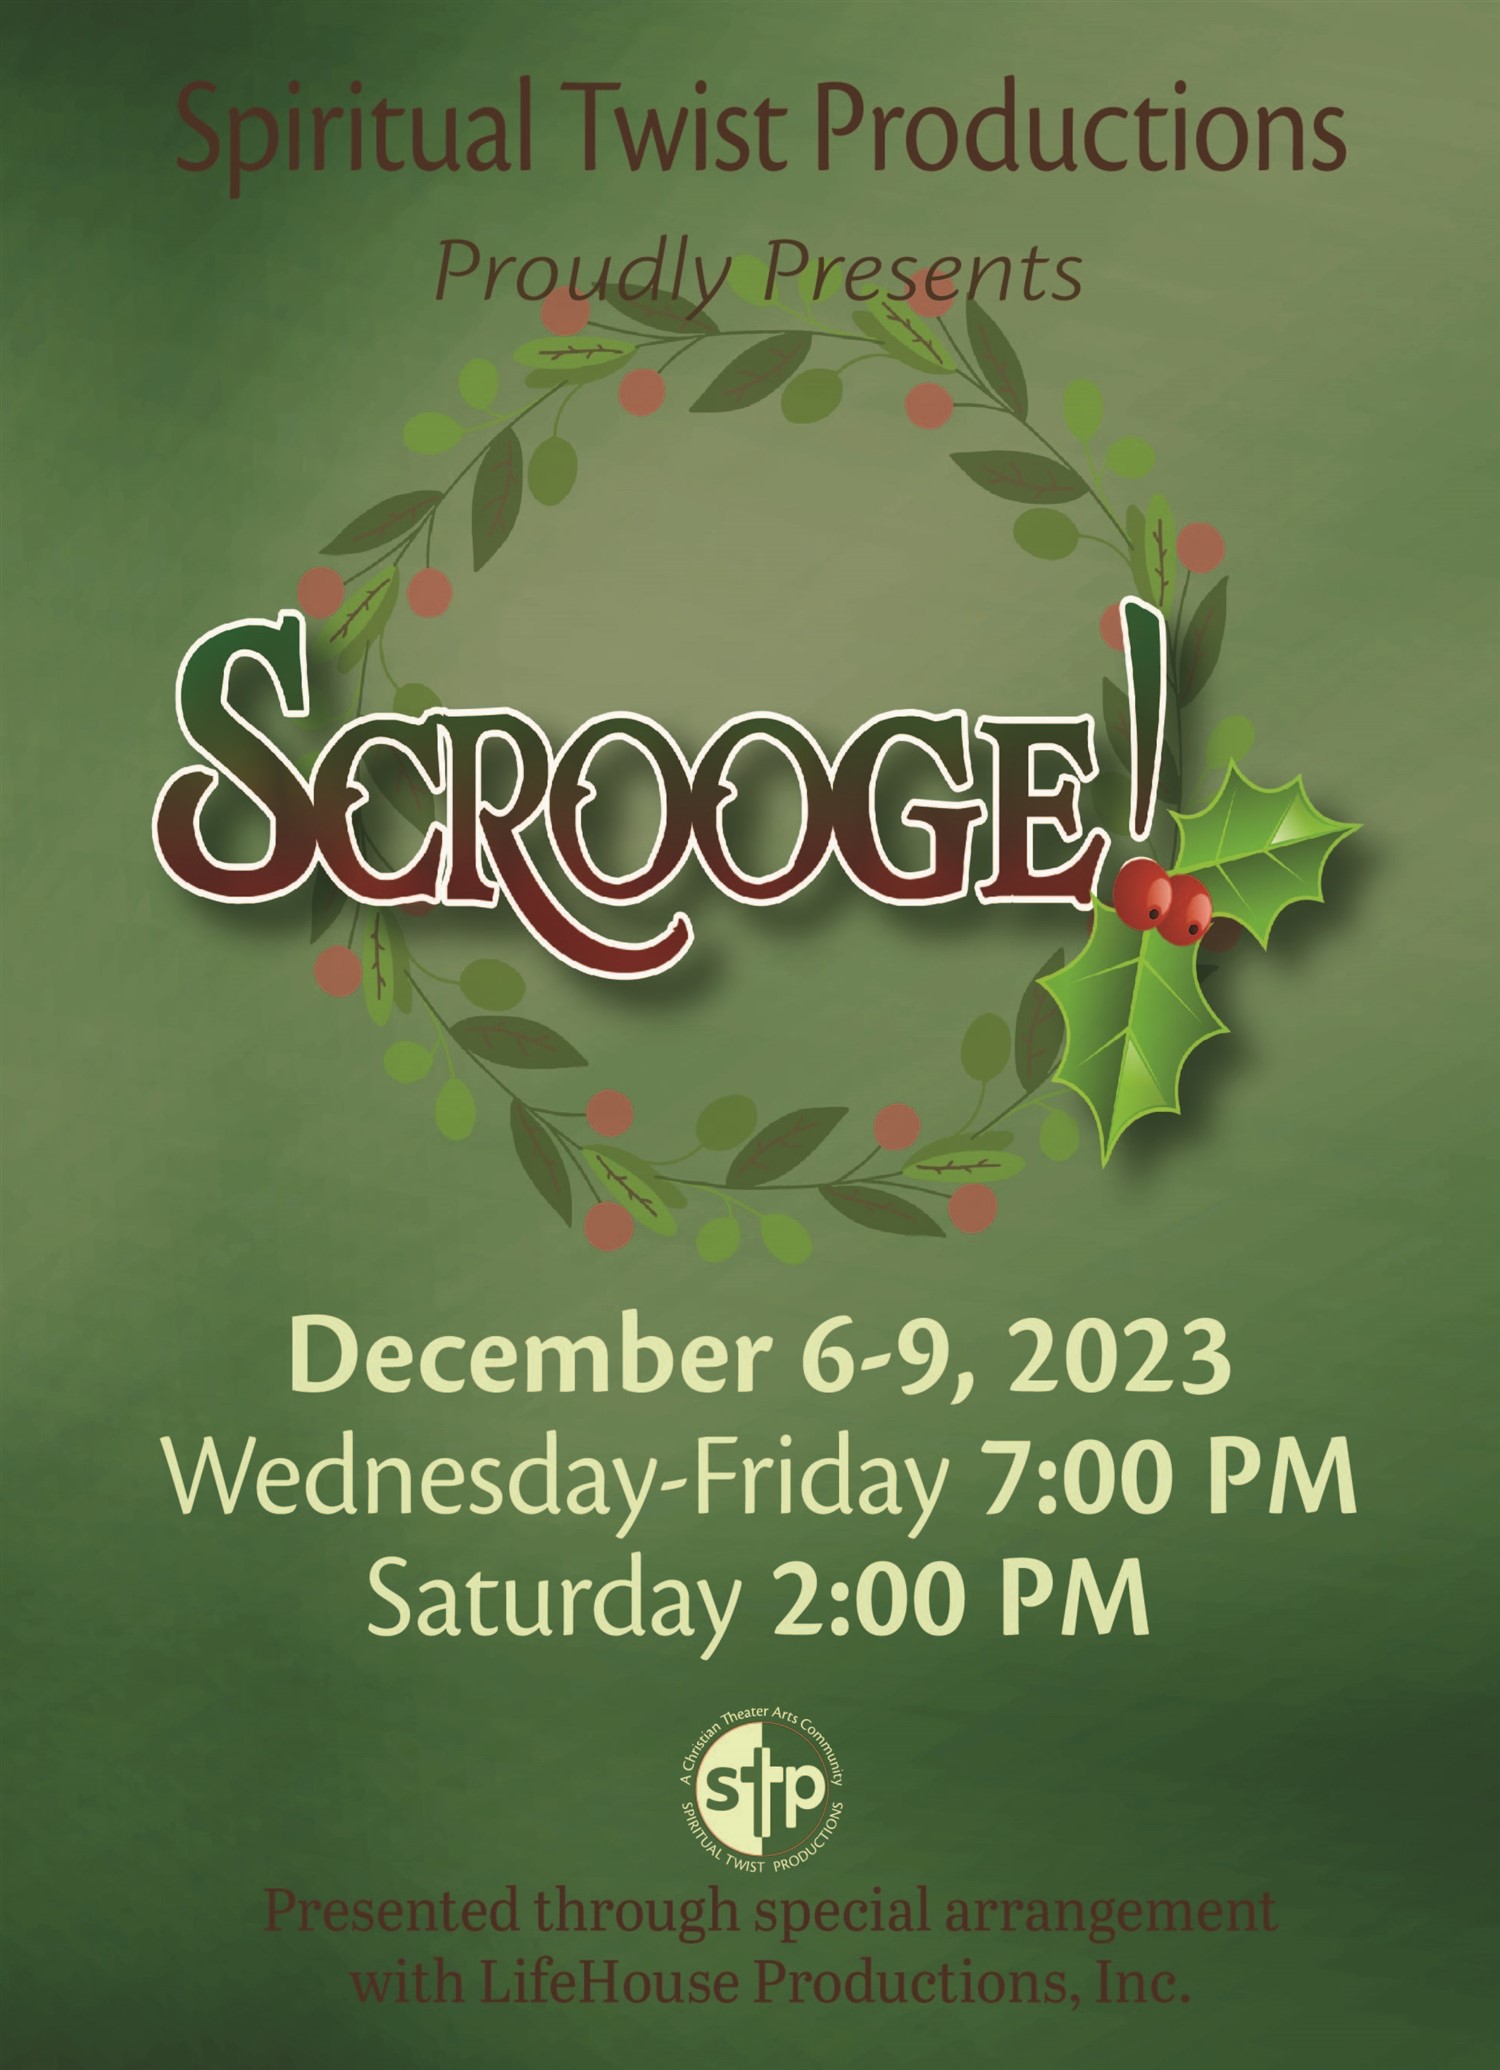 Scrooge! Wednesday, December 6, 2023 @ 7 PM  50% off Groups of 8+ on Dec 06, 19:00@Spiritual Twist Productions - Pick a seat, Buy tickets and Get information on Spiritual Twist Productions tickets.spiritualtwist.com